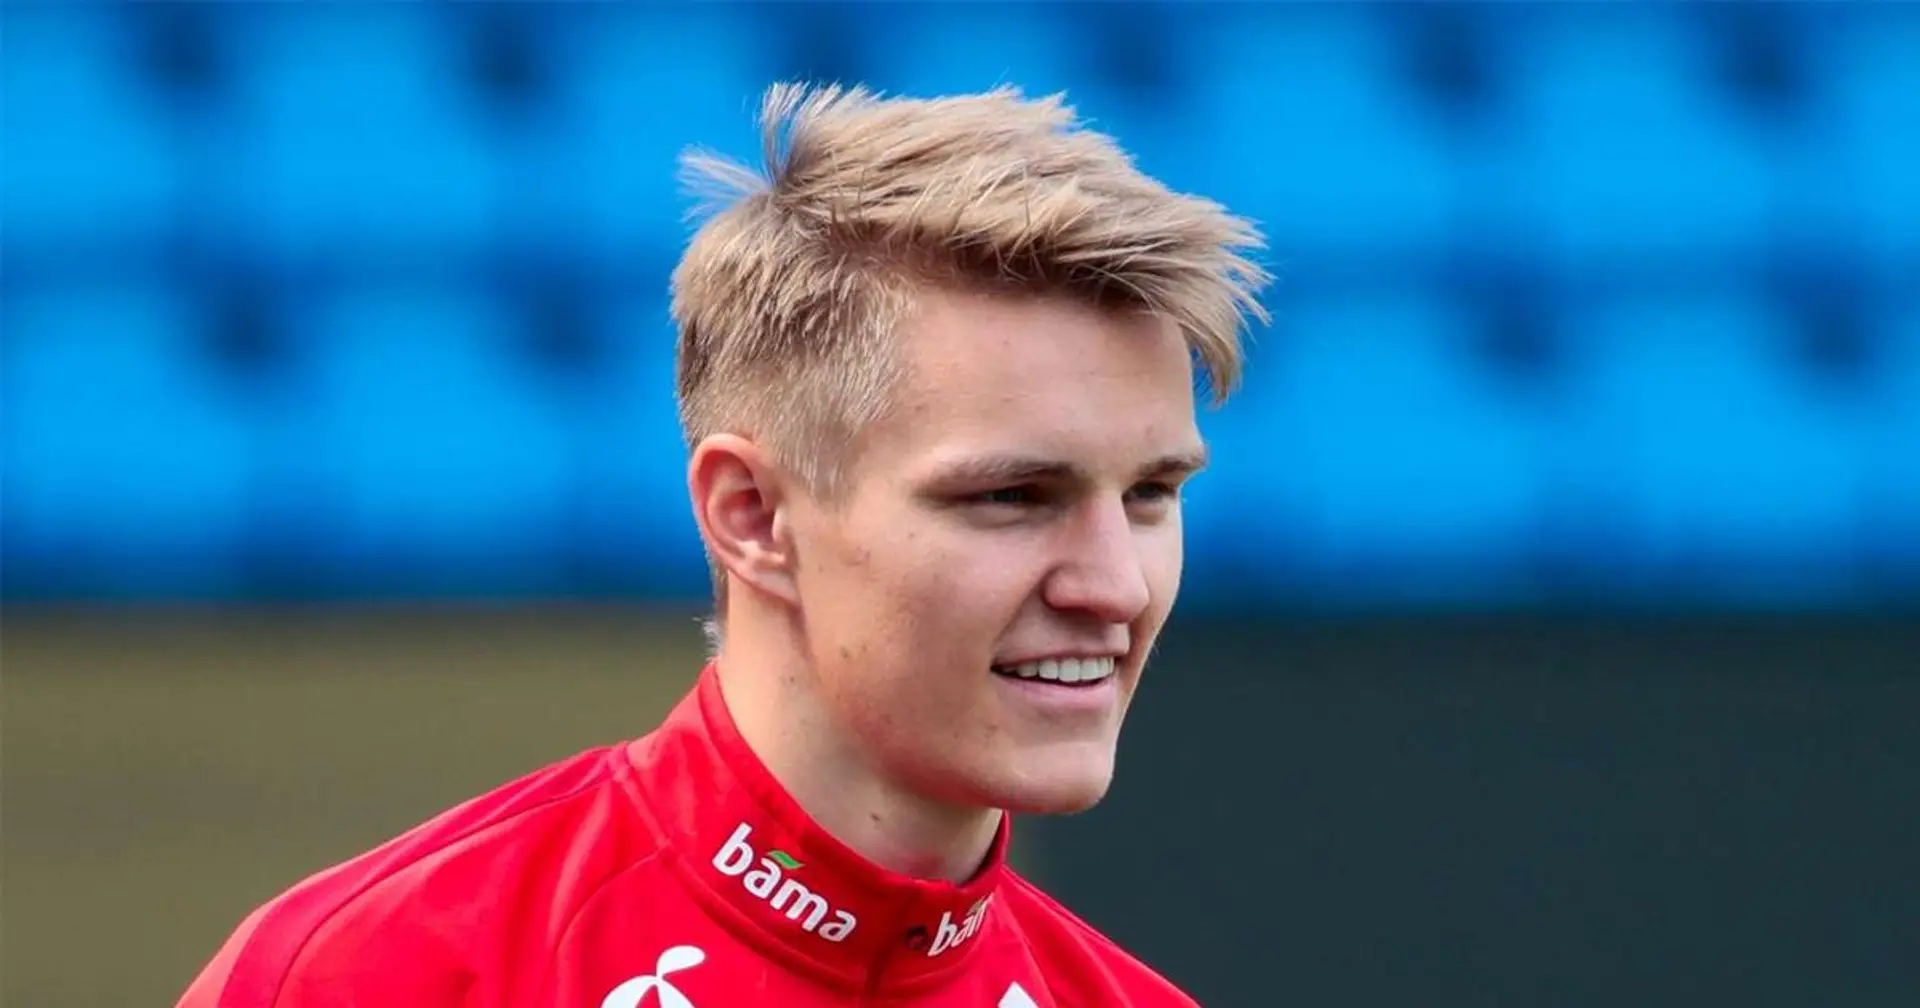 'Martin was super ready for that': Odegaard appointed Norway captain